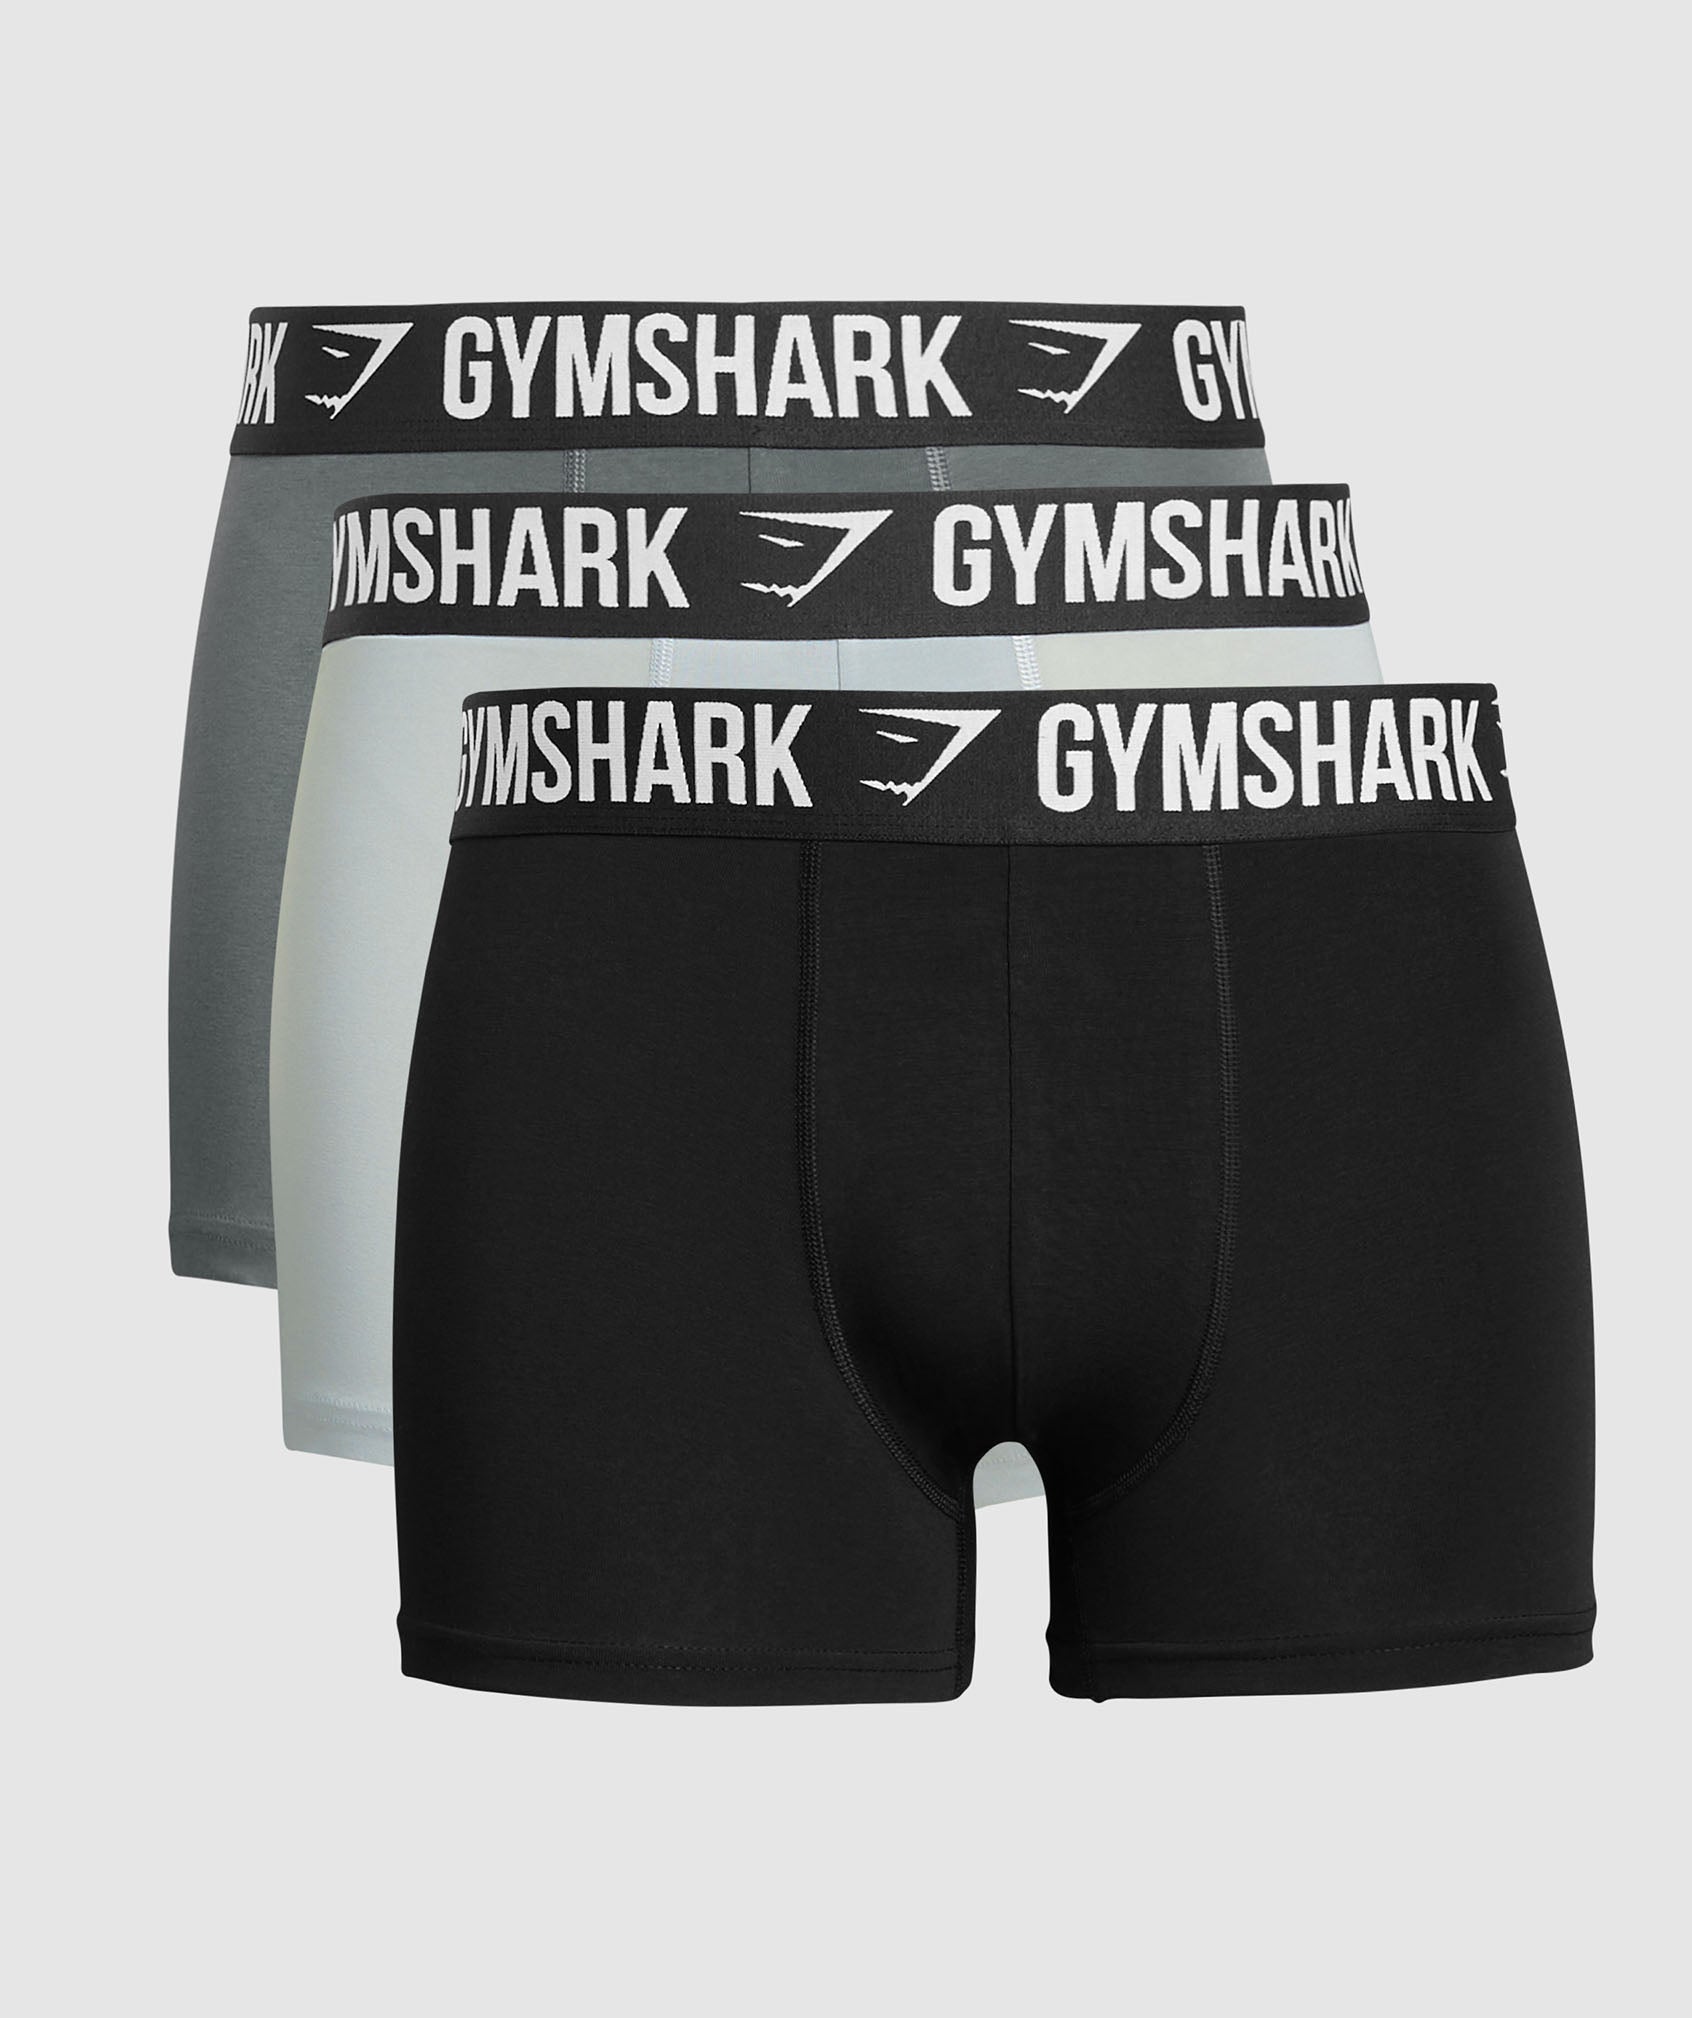 Boxer Brief 3PK in Black/Pitch Grey/Light Grey - view 1